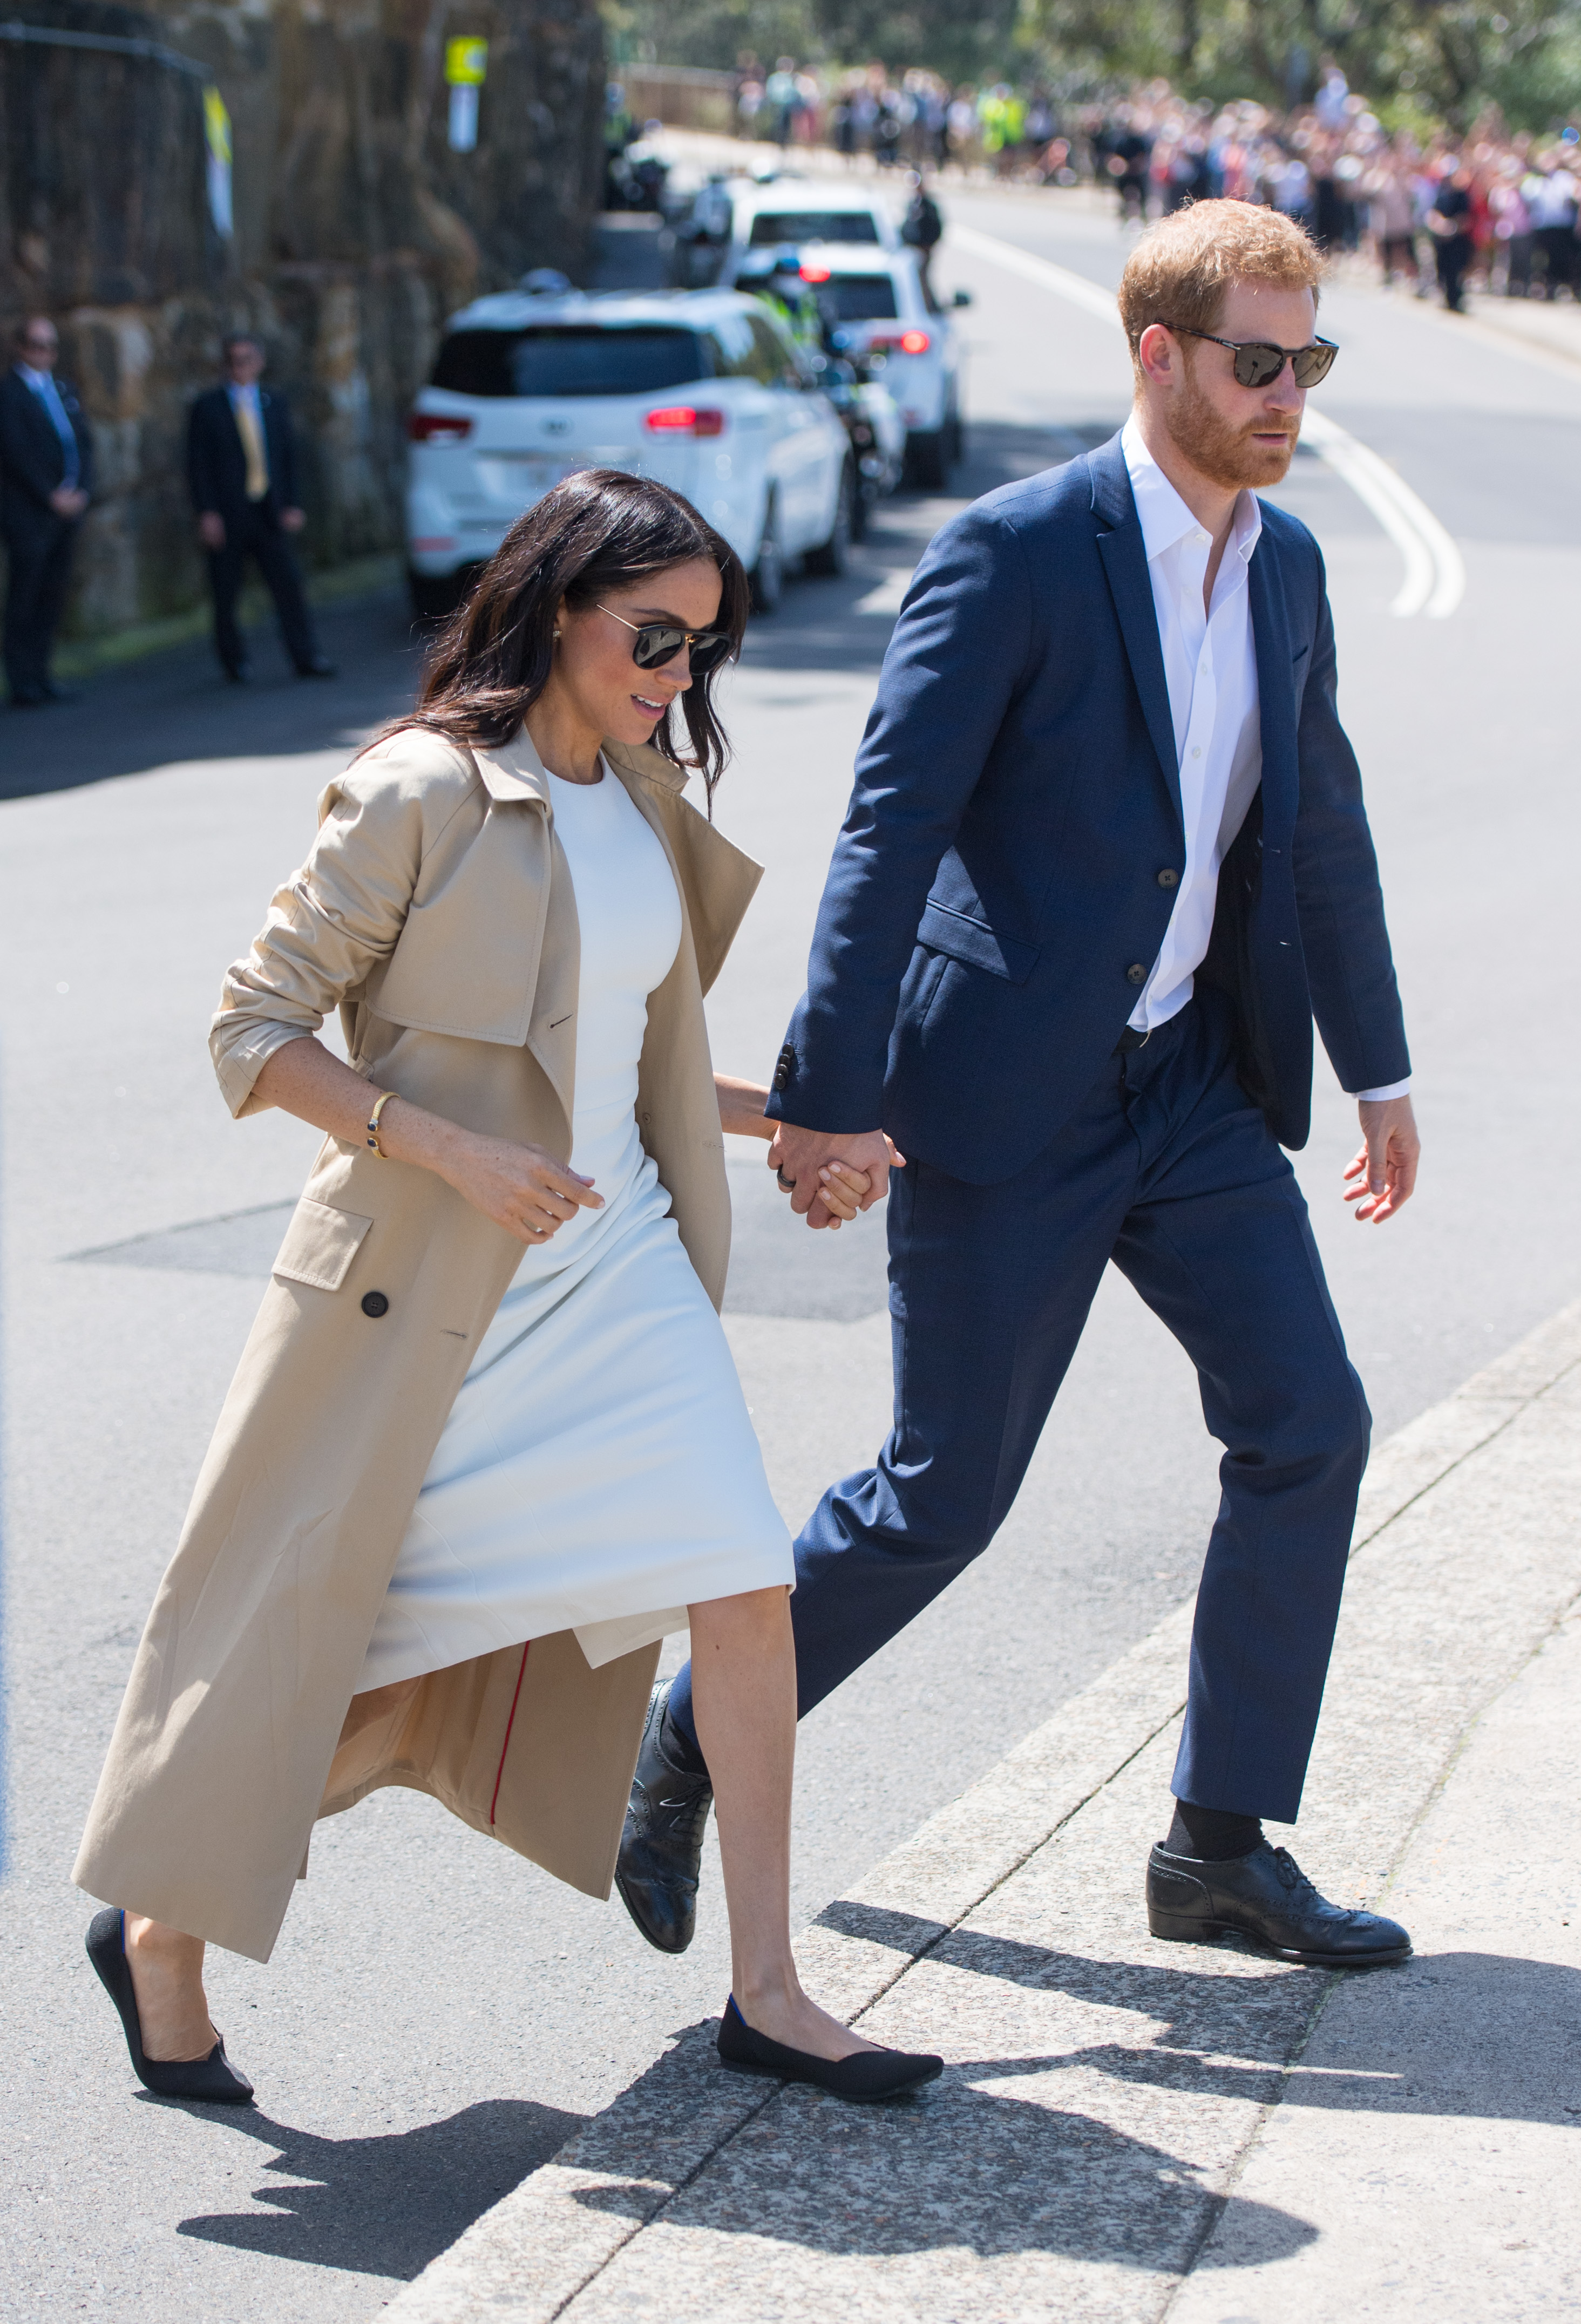 Megan Markle wears Rothy flats in Sydney, Australia (Dominic Lipinski/ Pool/Getty Images) (Pool—Getty Images)